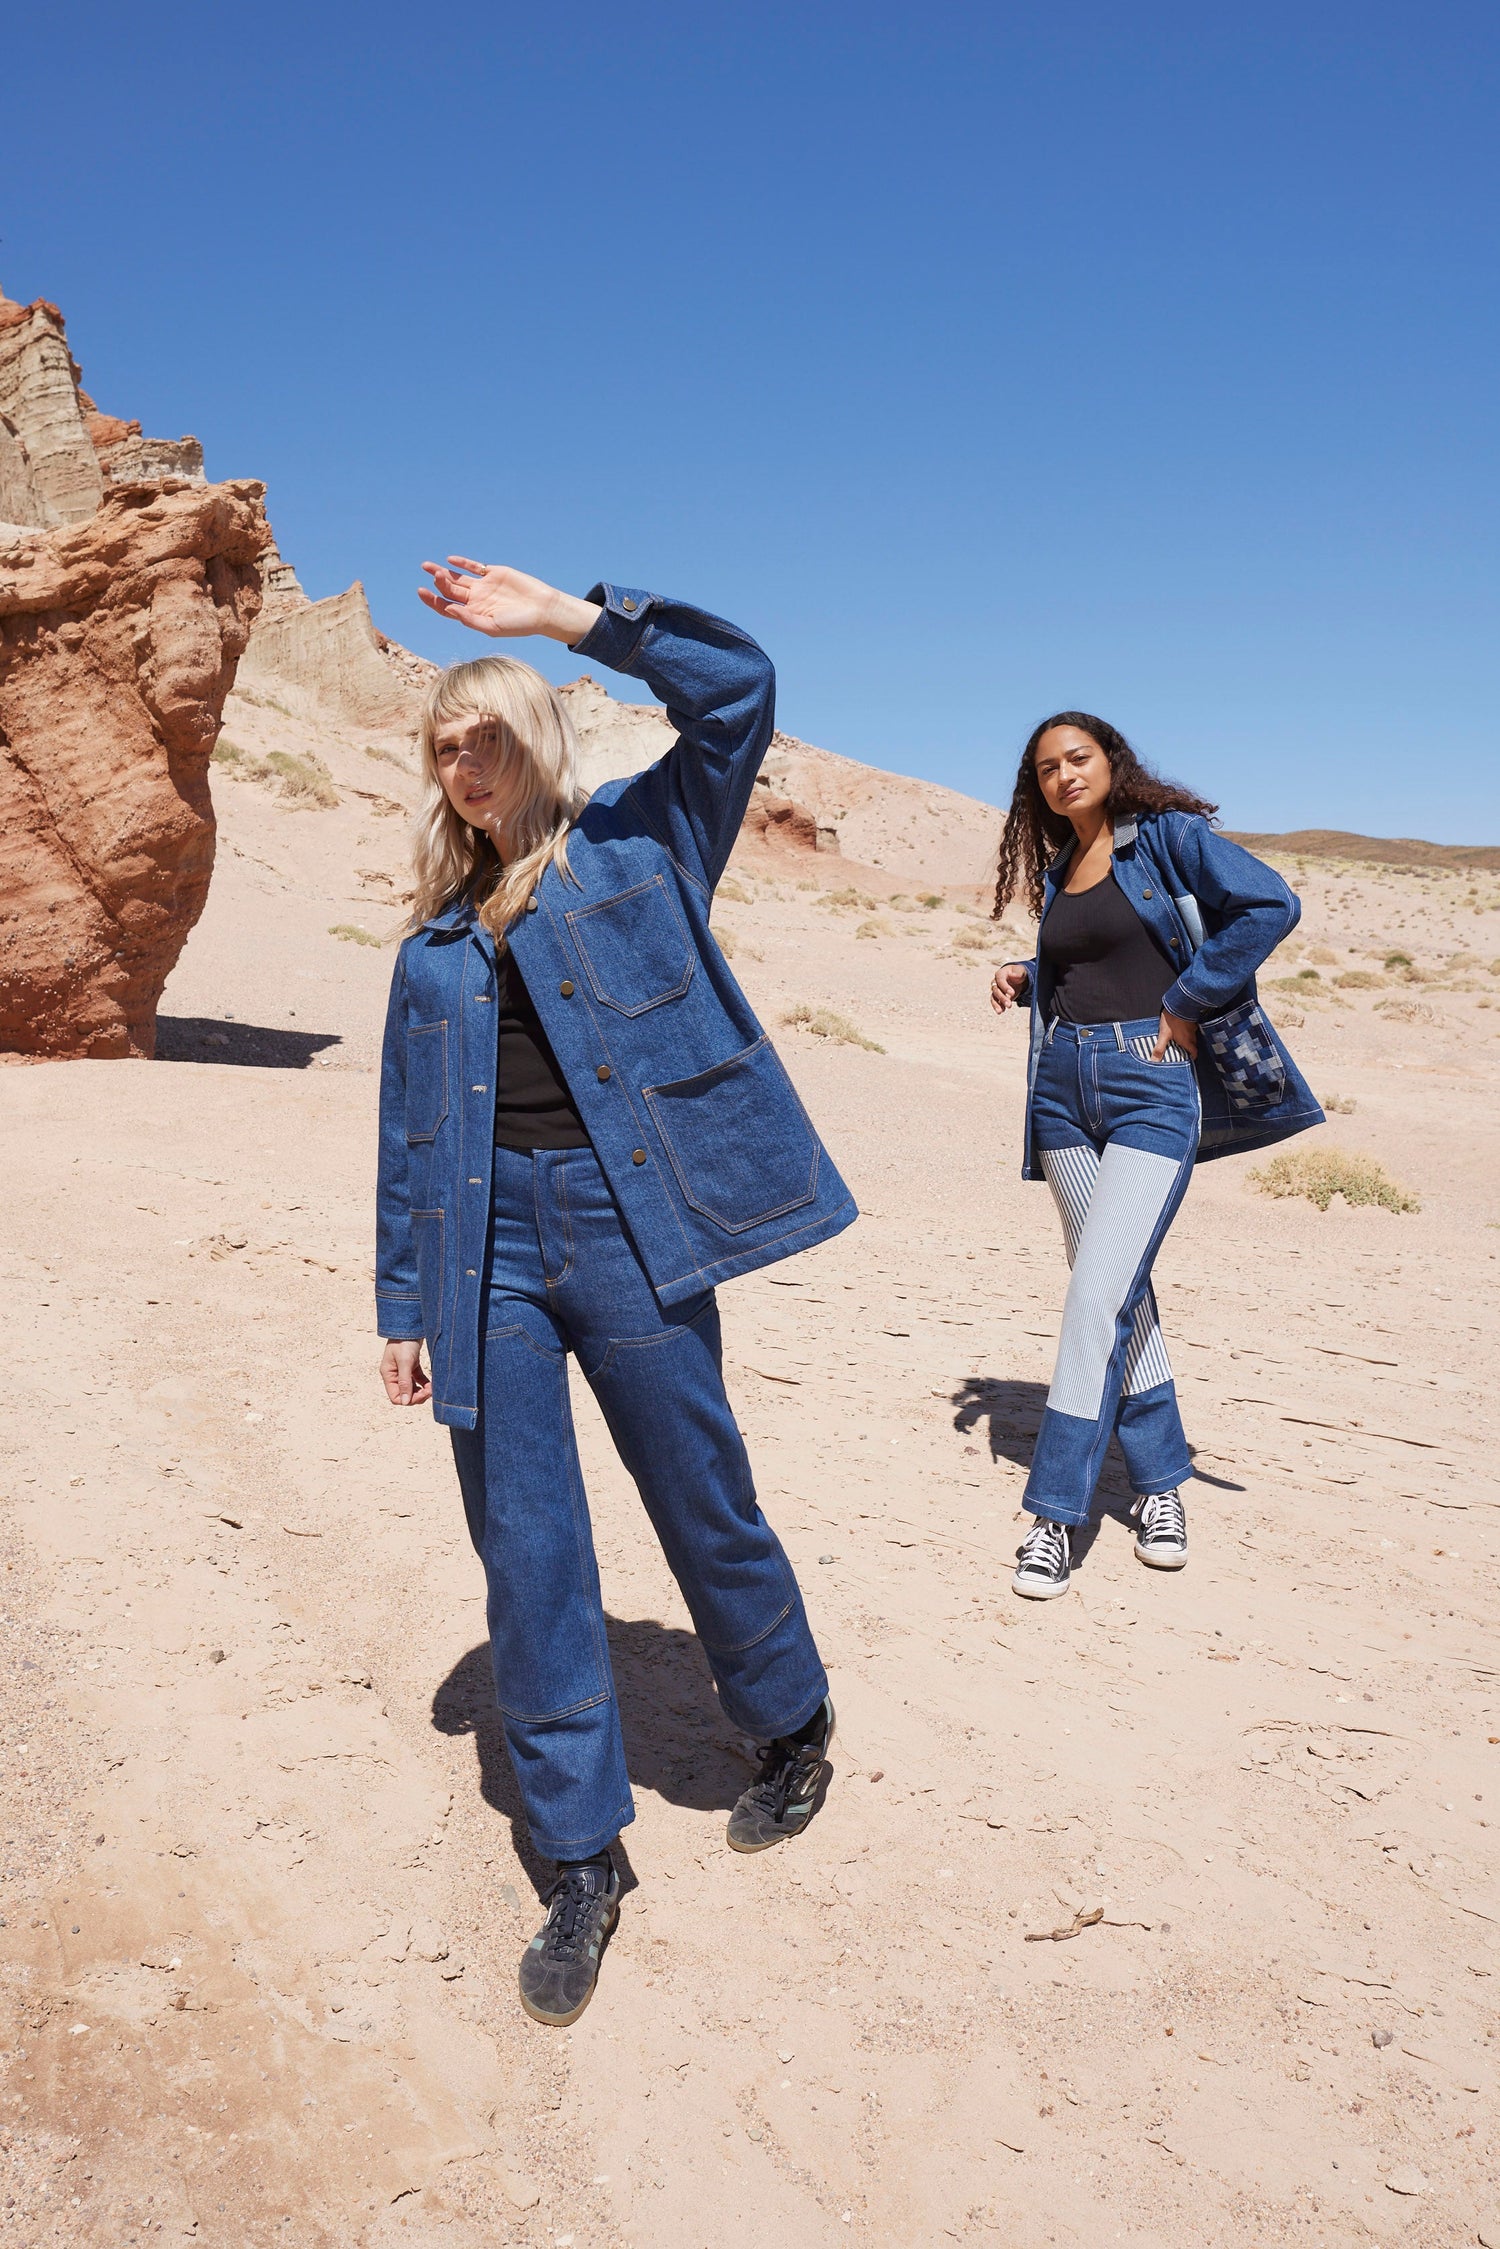 two friends explore the mojave desert in matching denim jackets and workwear jeans